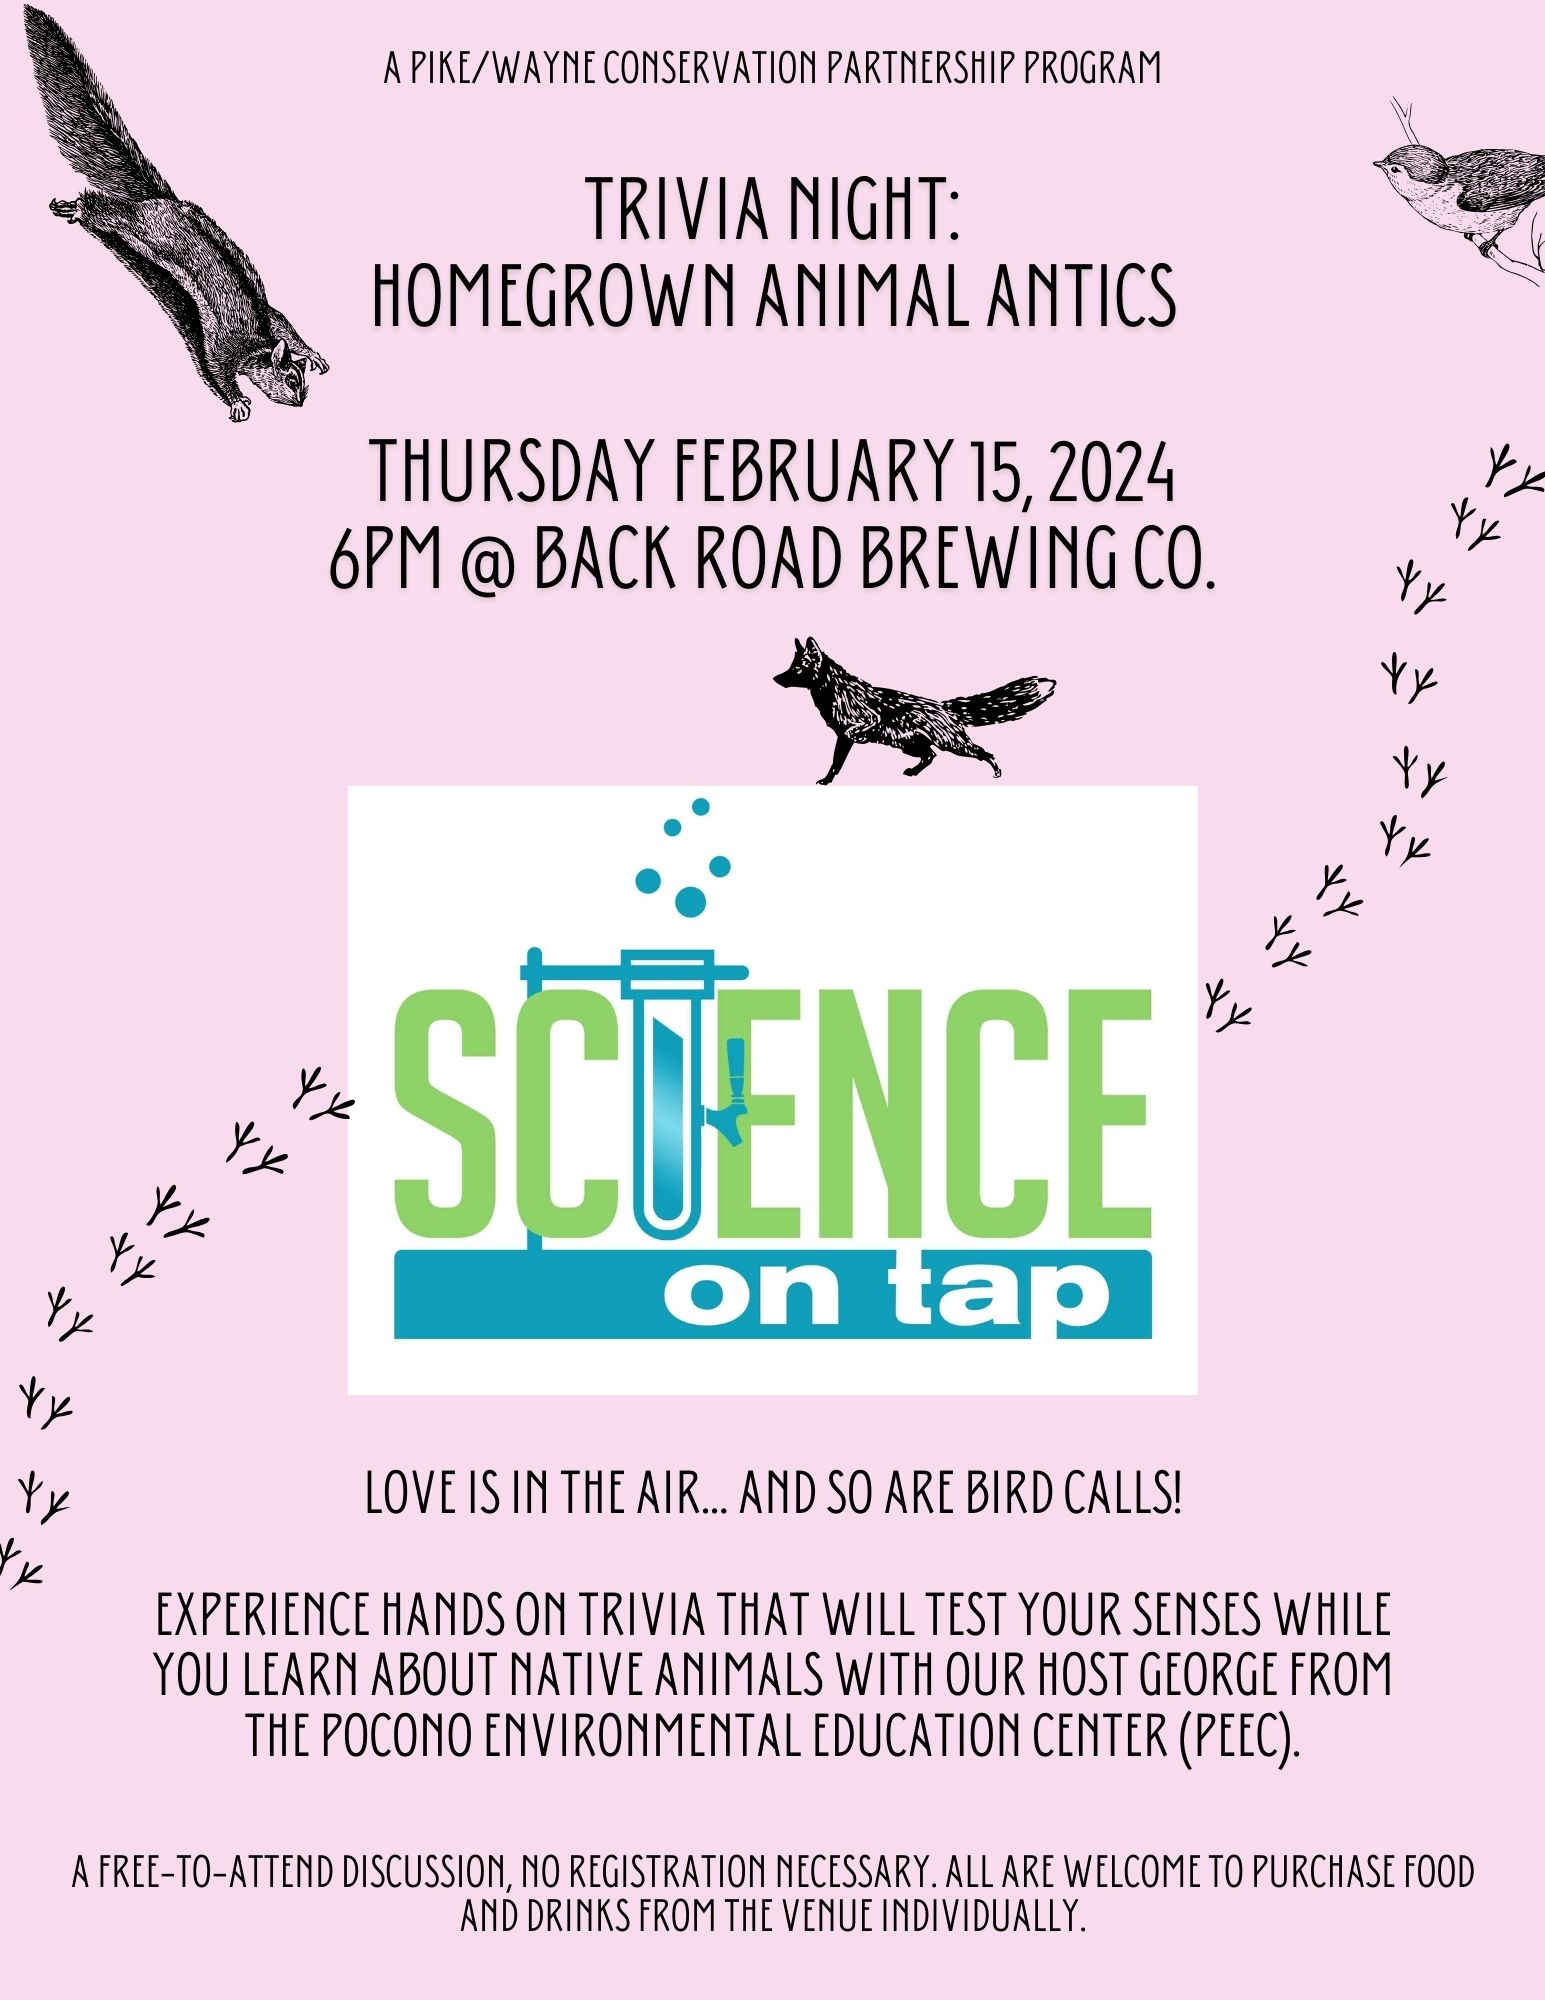 A flyer with the following text "Trivia Night: Homegrown Animal Antics. Thursday February 15, 2024 6pm at Back Road Brewing Company. Love is in the air... and so are bird calls! Experience hands on trivia that will test your senses while you learn about native animals with our host George from the Pocono Environmental Education Center (PEEC). This is a free-to-attend discussion, no registration necessary. All are welcome to purchase food and drinks from the venue. individually. A Pike/Wayne Conservation Partnership Program."